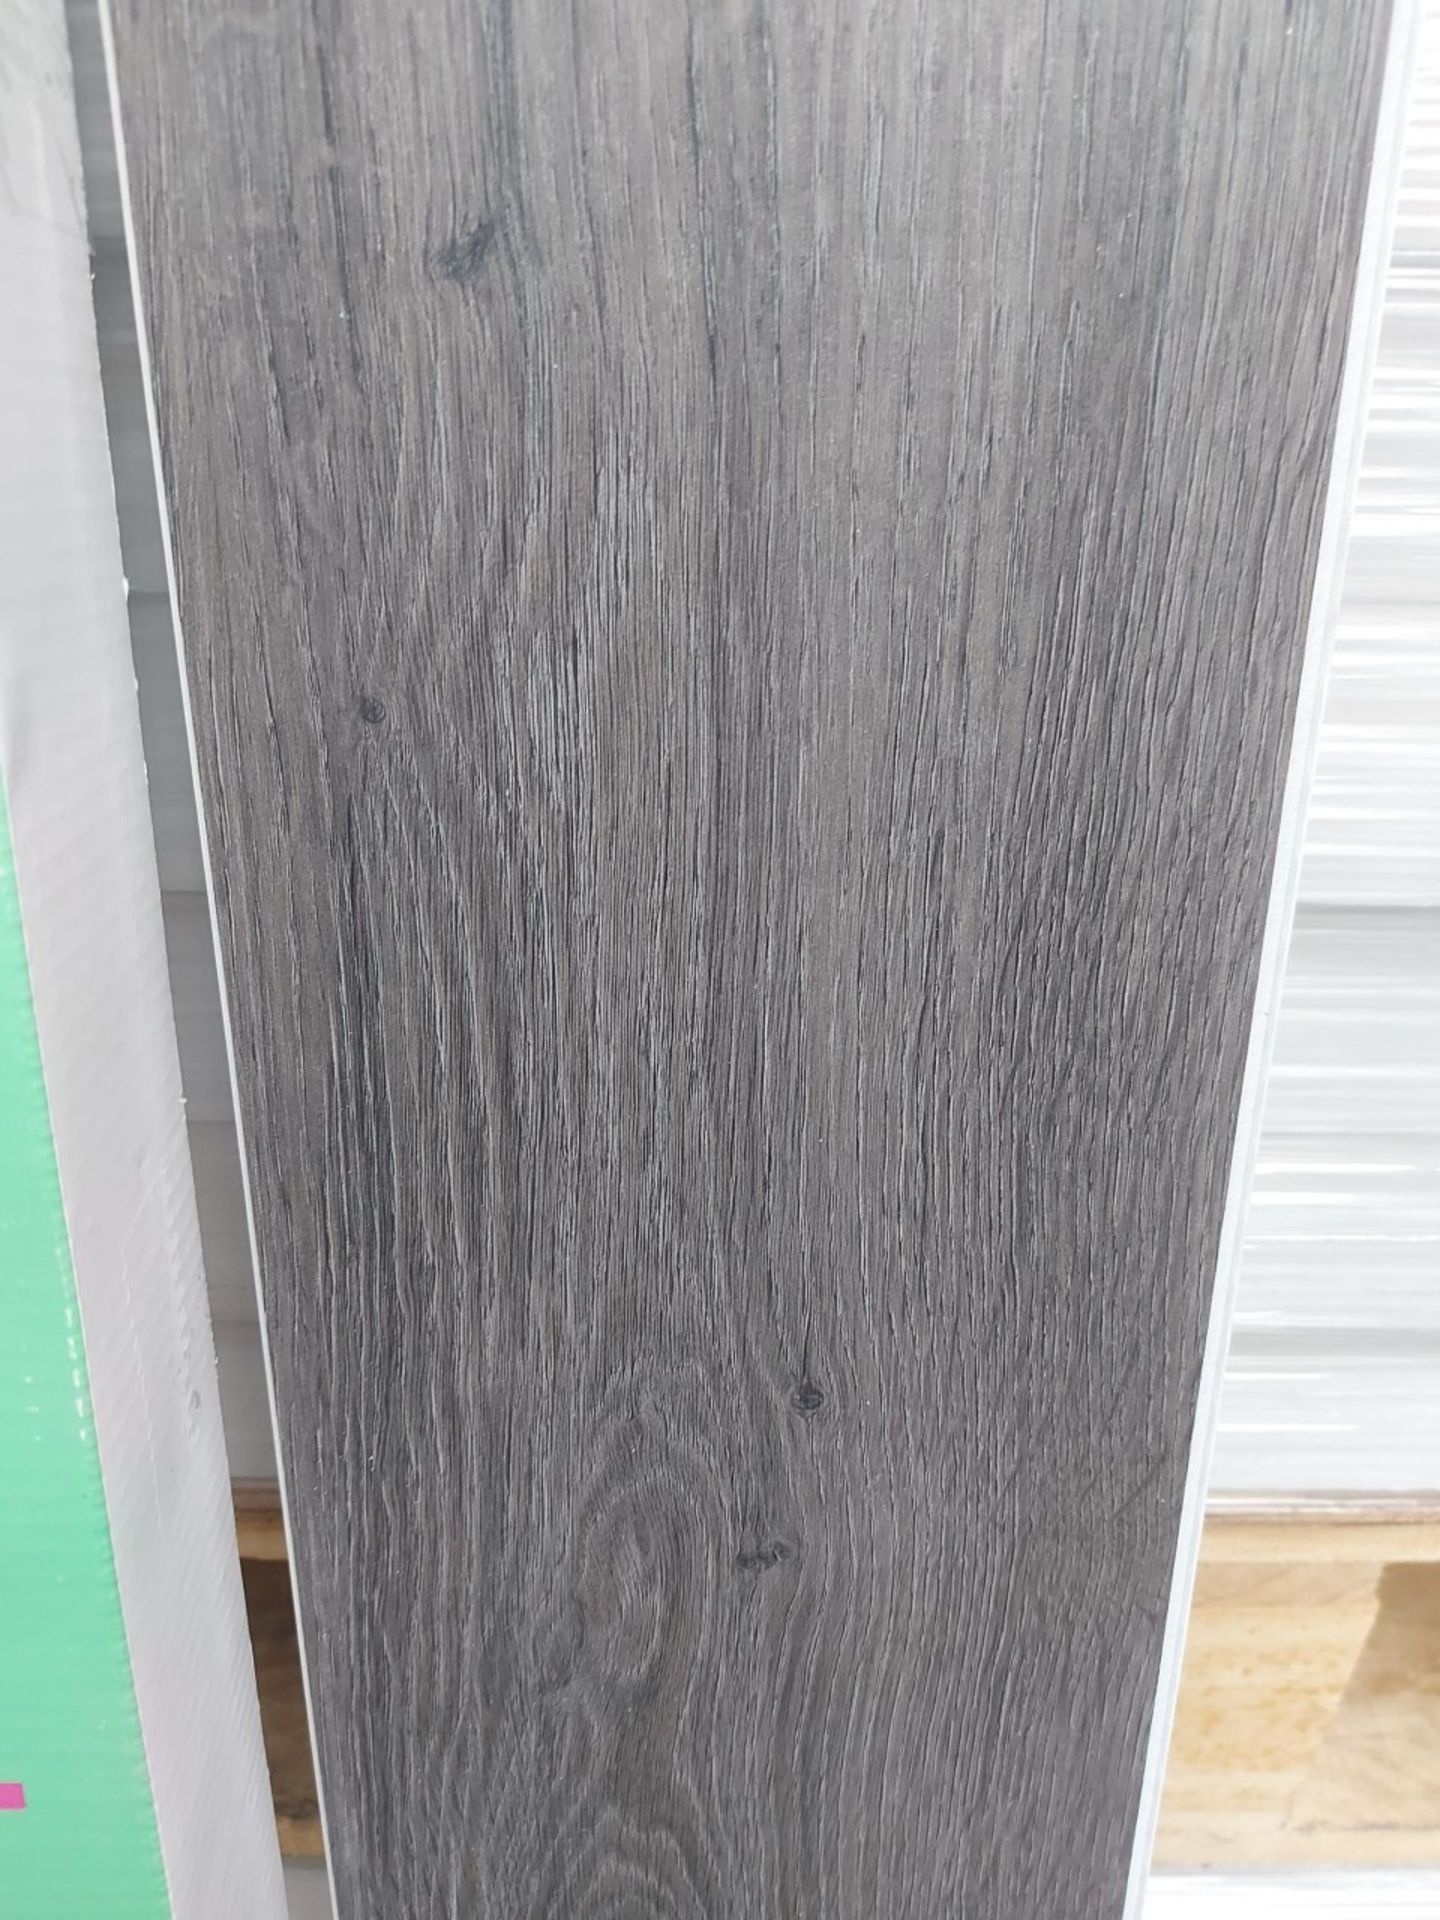 PALLET TO CONTAIN 52 x PACKS OF NEW BACHETA LUXURY VINYL CLICK PLANK FLOORING. RRP £58 PER PACK. - Image 3 of 3